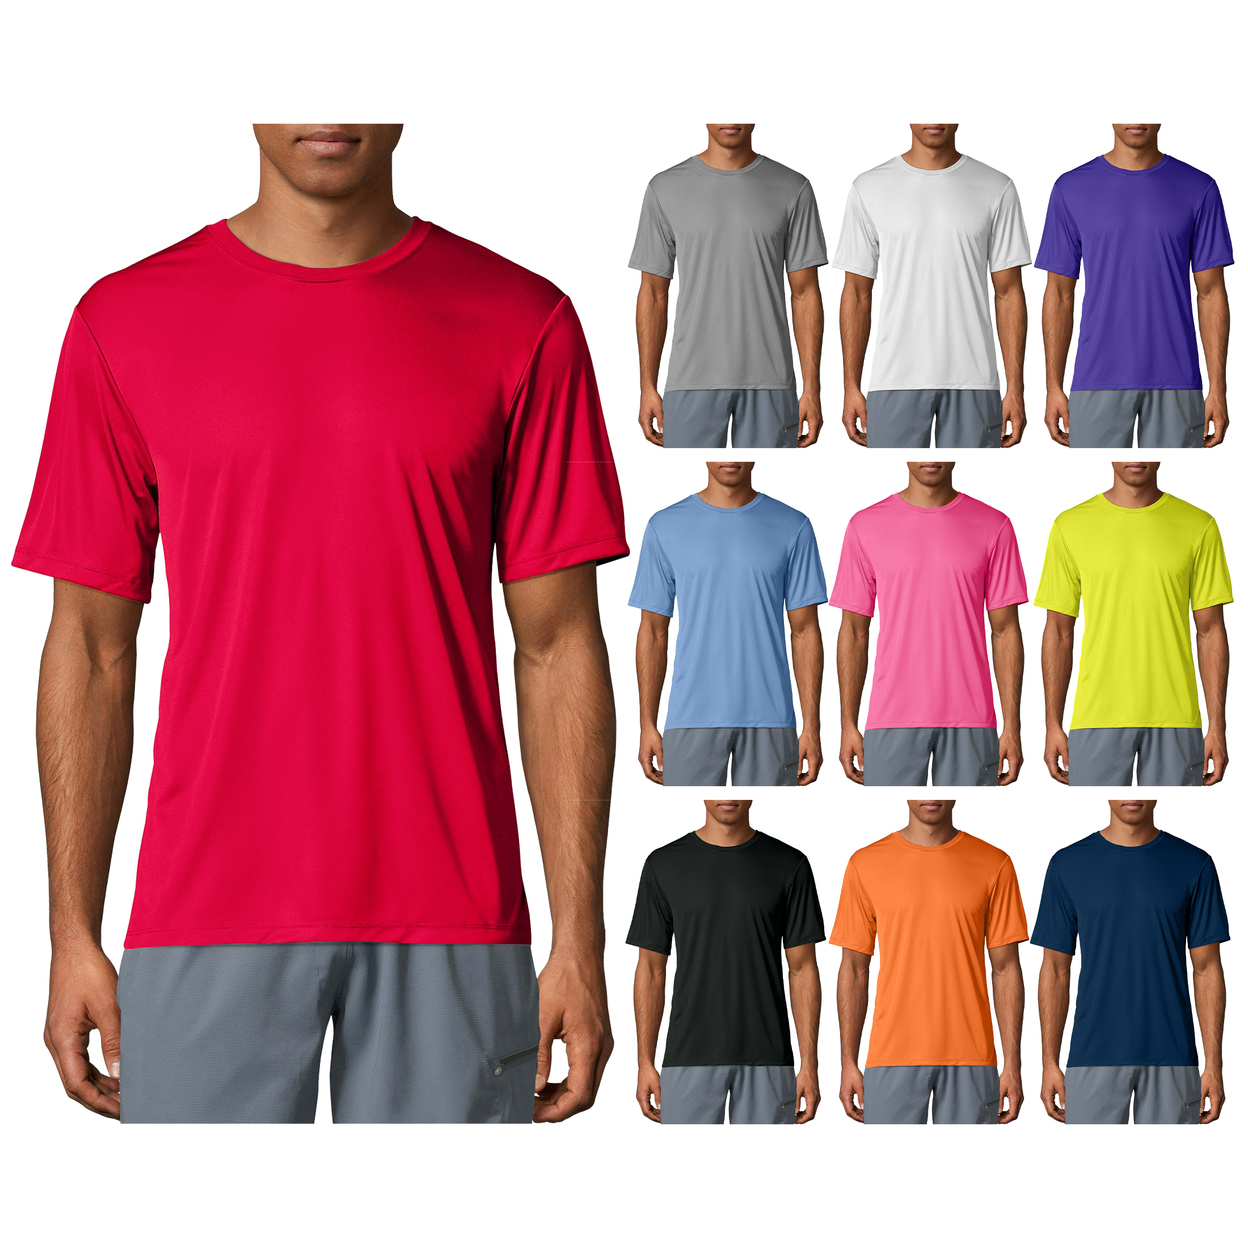 4-Pack: Men's Moisture Wicking Cool Dri-Fit Performance Short Sleeve Crew Neck T-Shirts - X-large